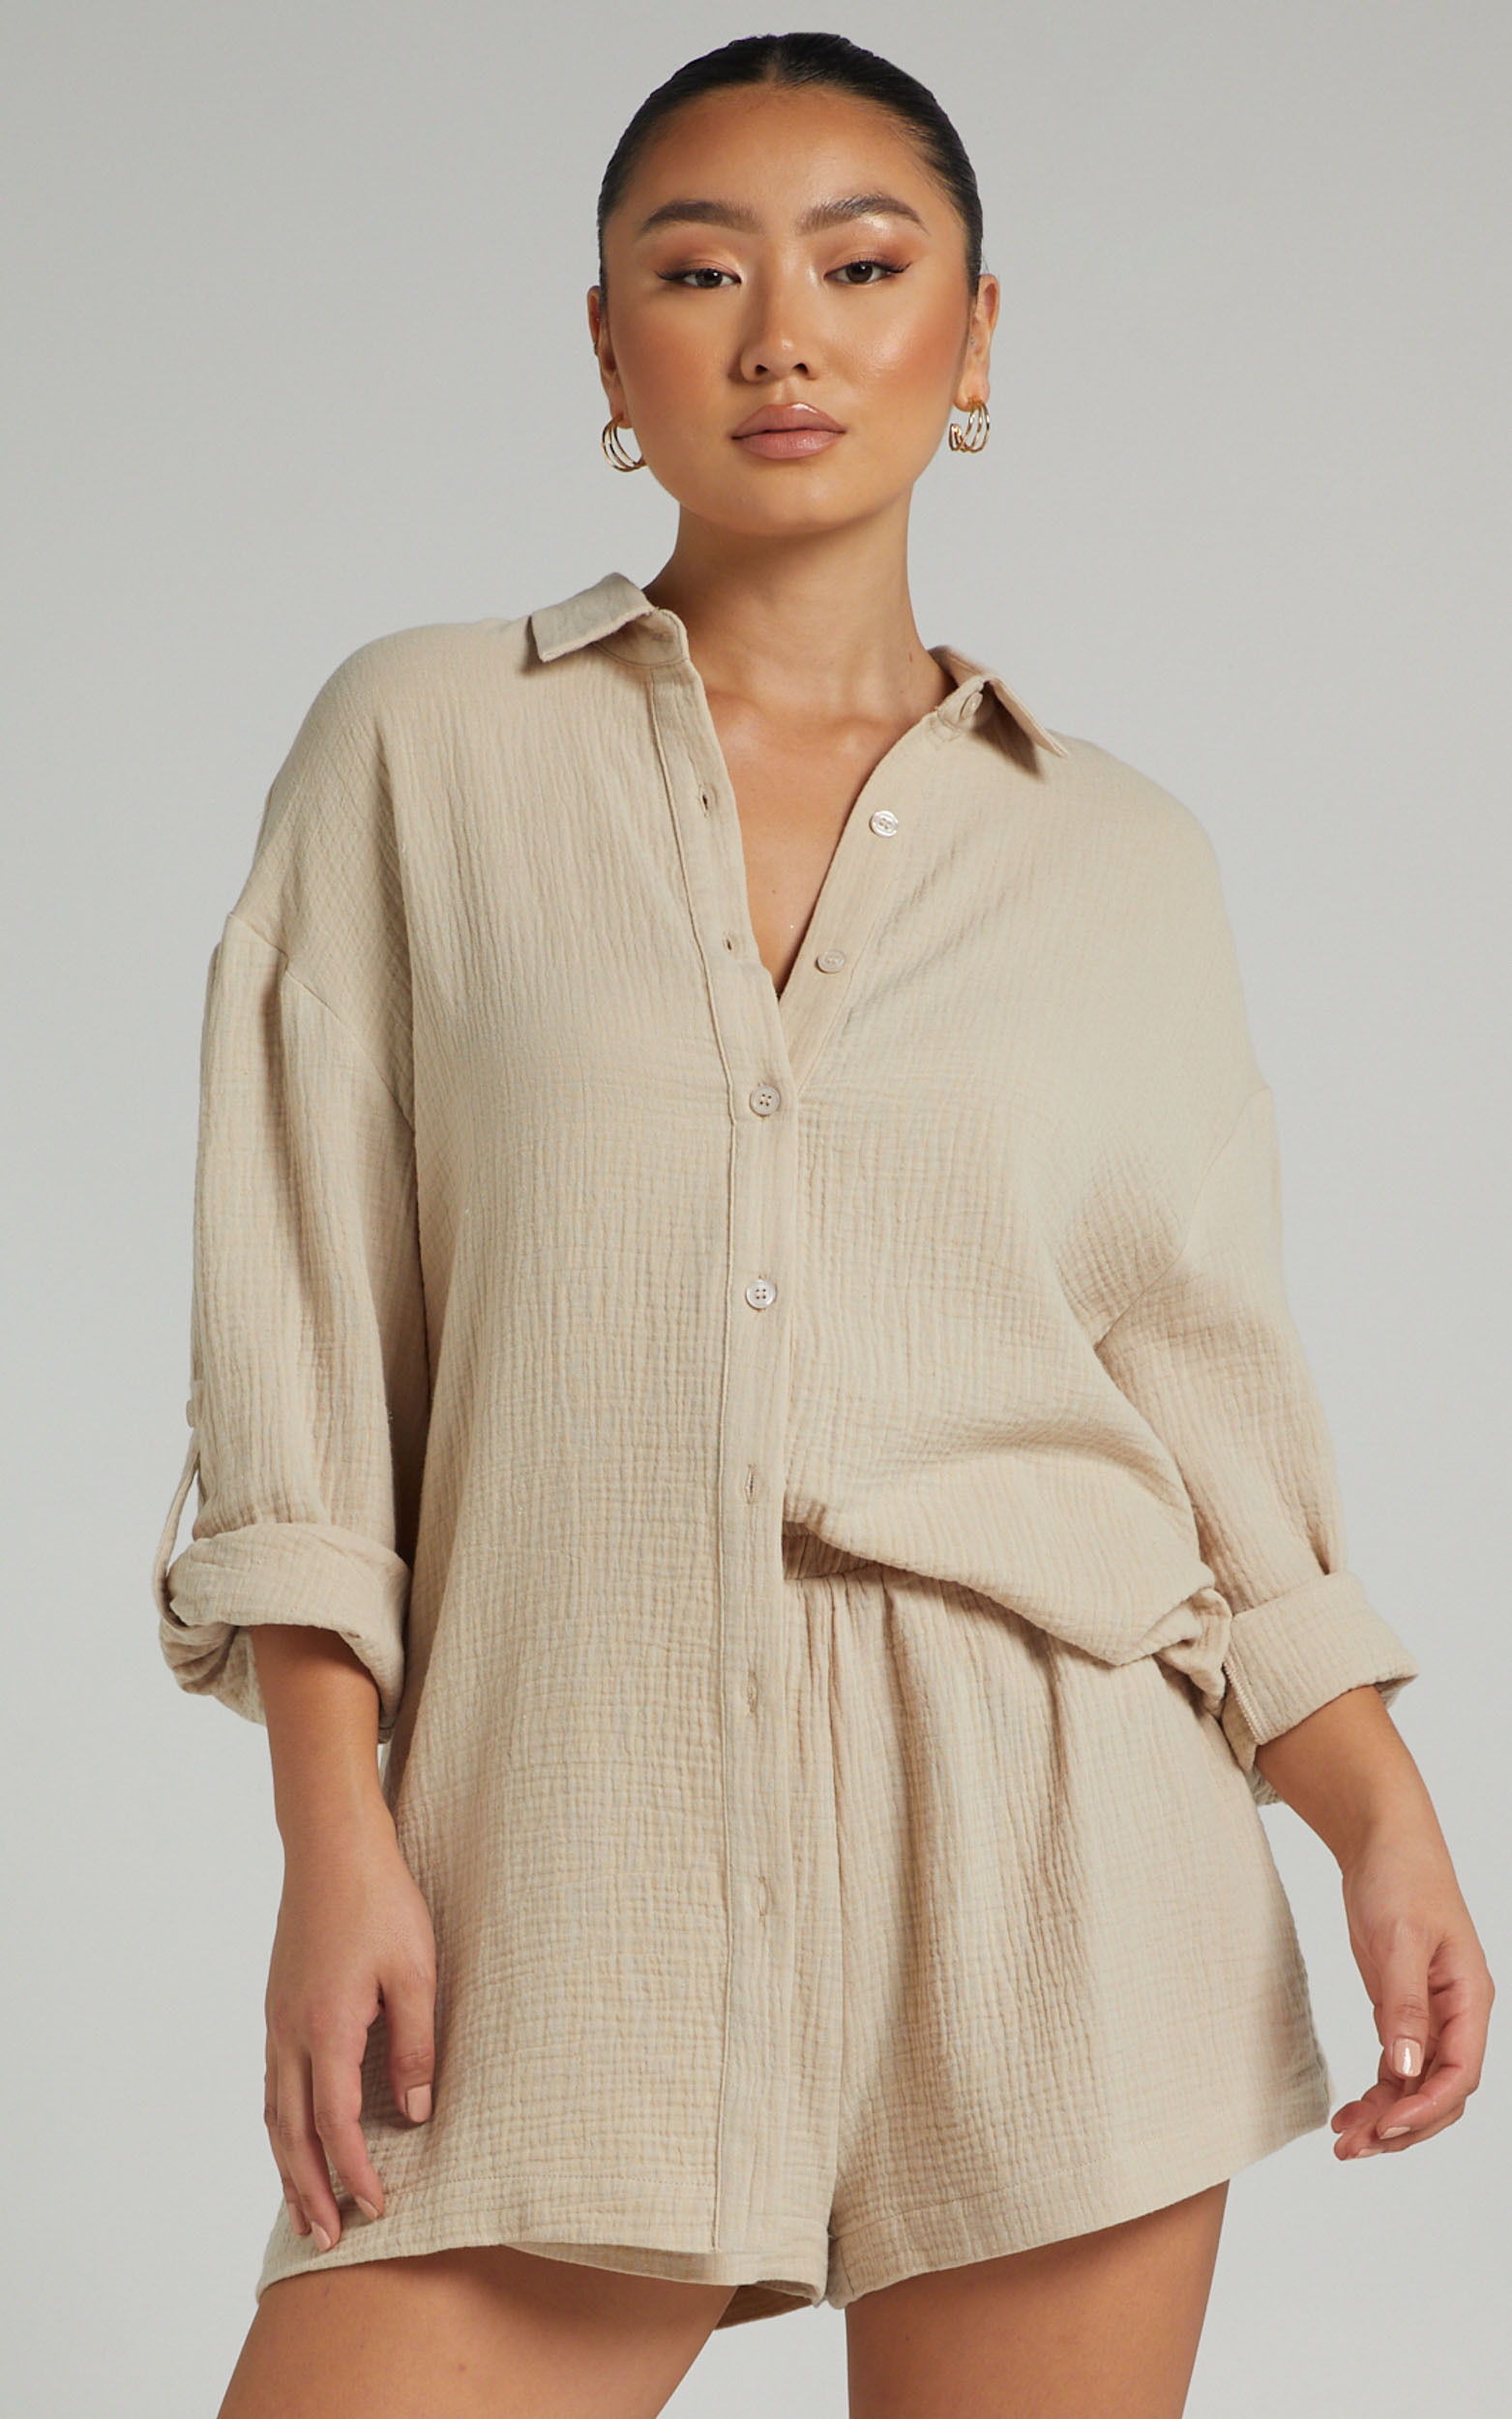 Ronaele Collared Basic Shirt in Neutral - 04, BRN1, hi-res image number null